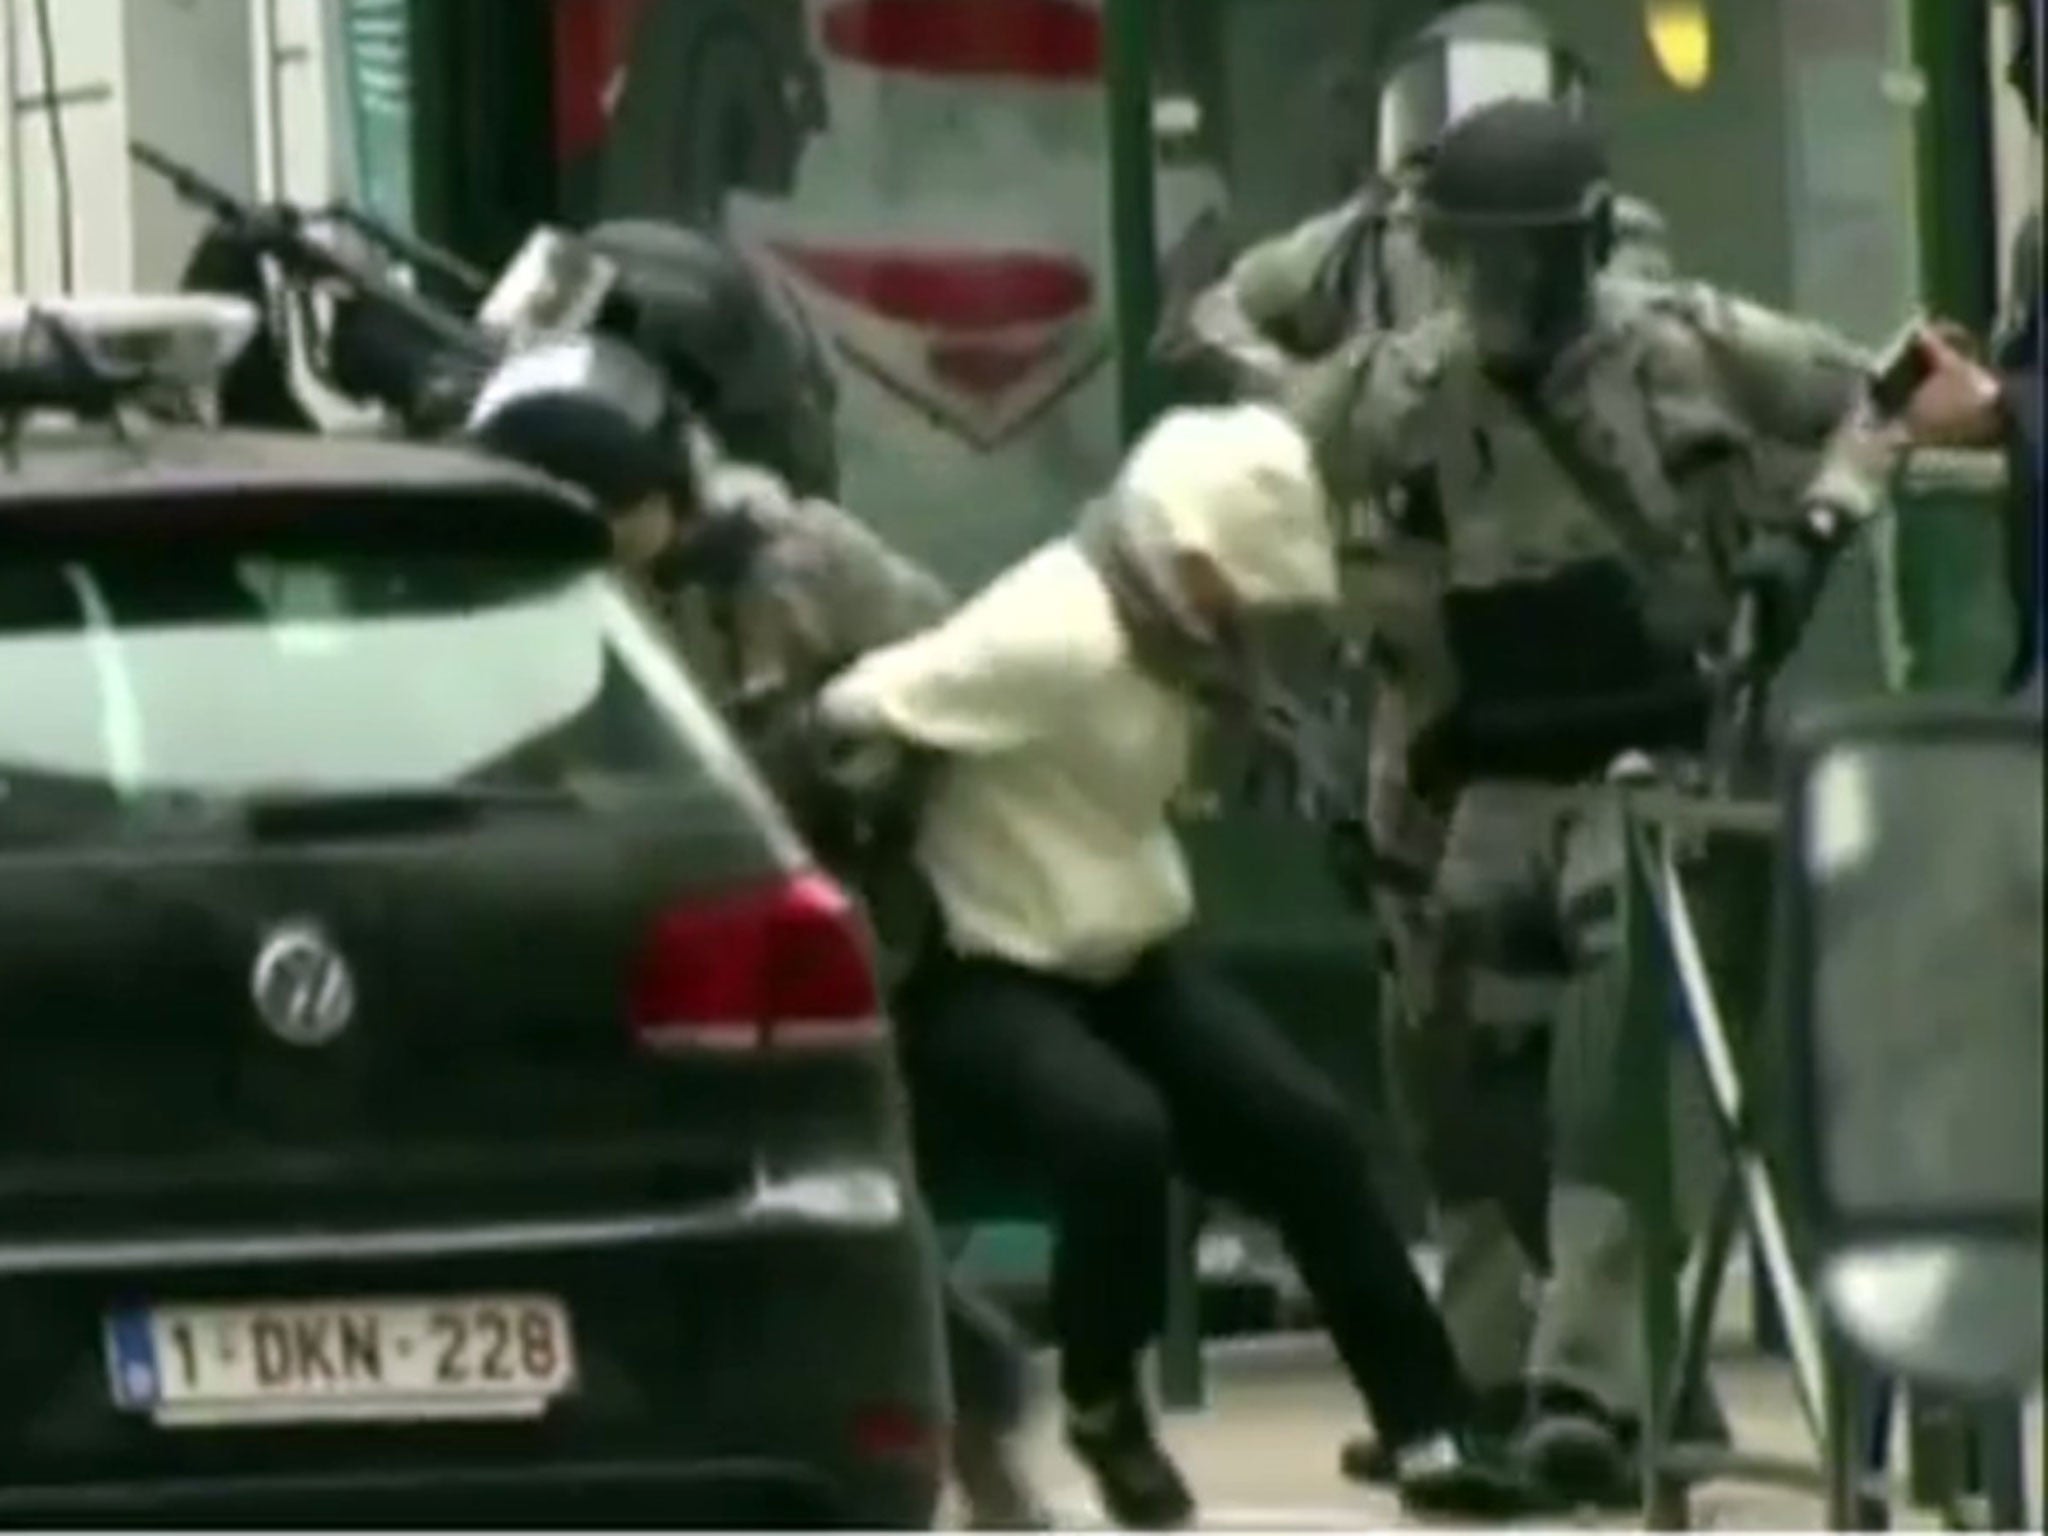 A suspect is seen being escorted by police following the raid in Molenbeek